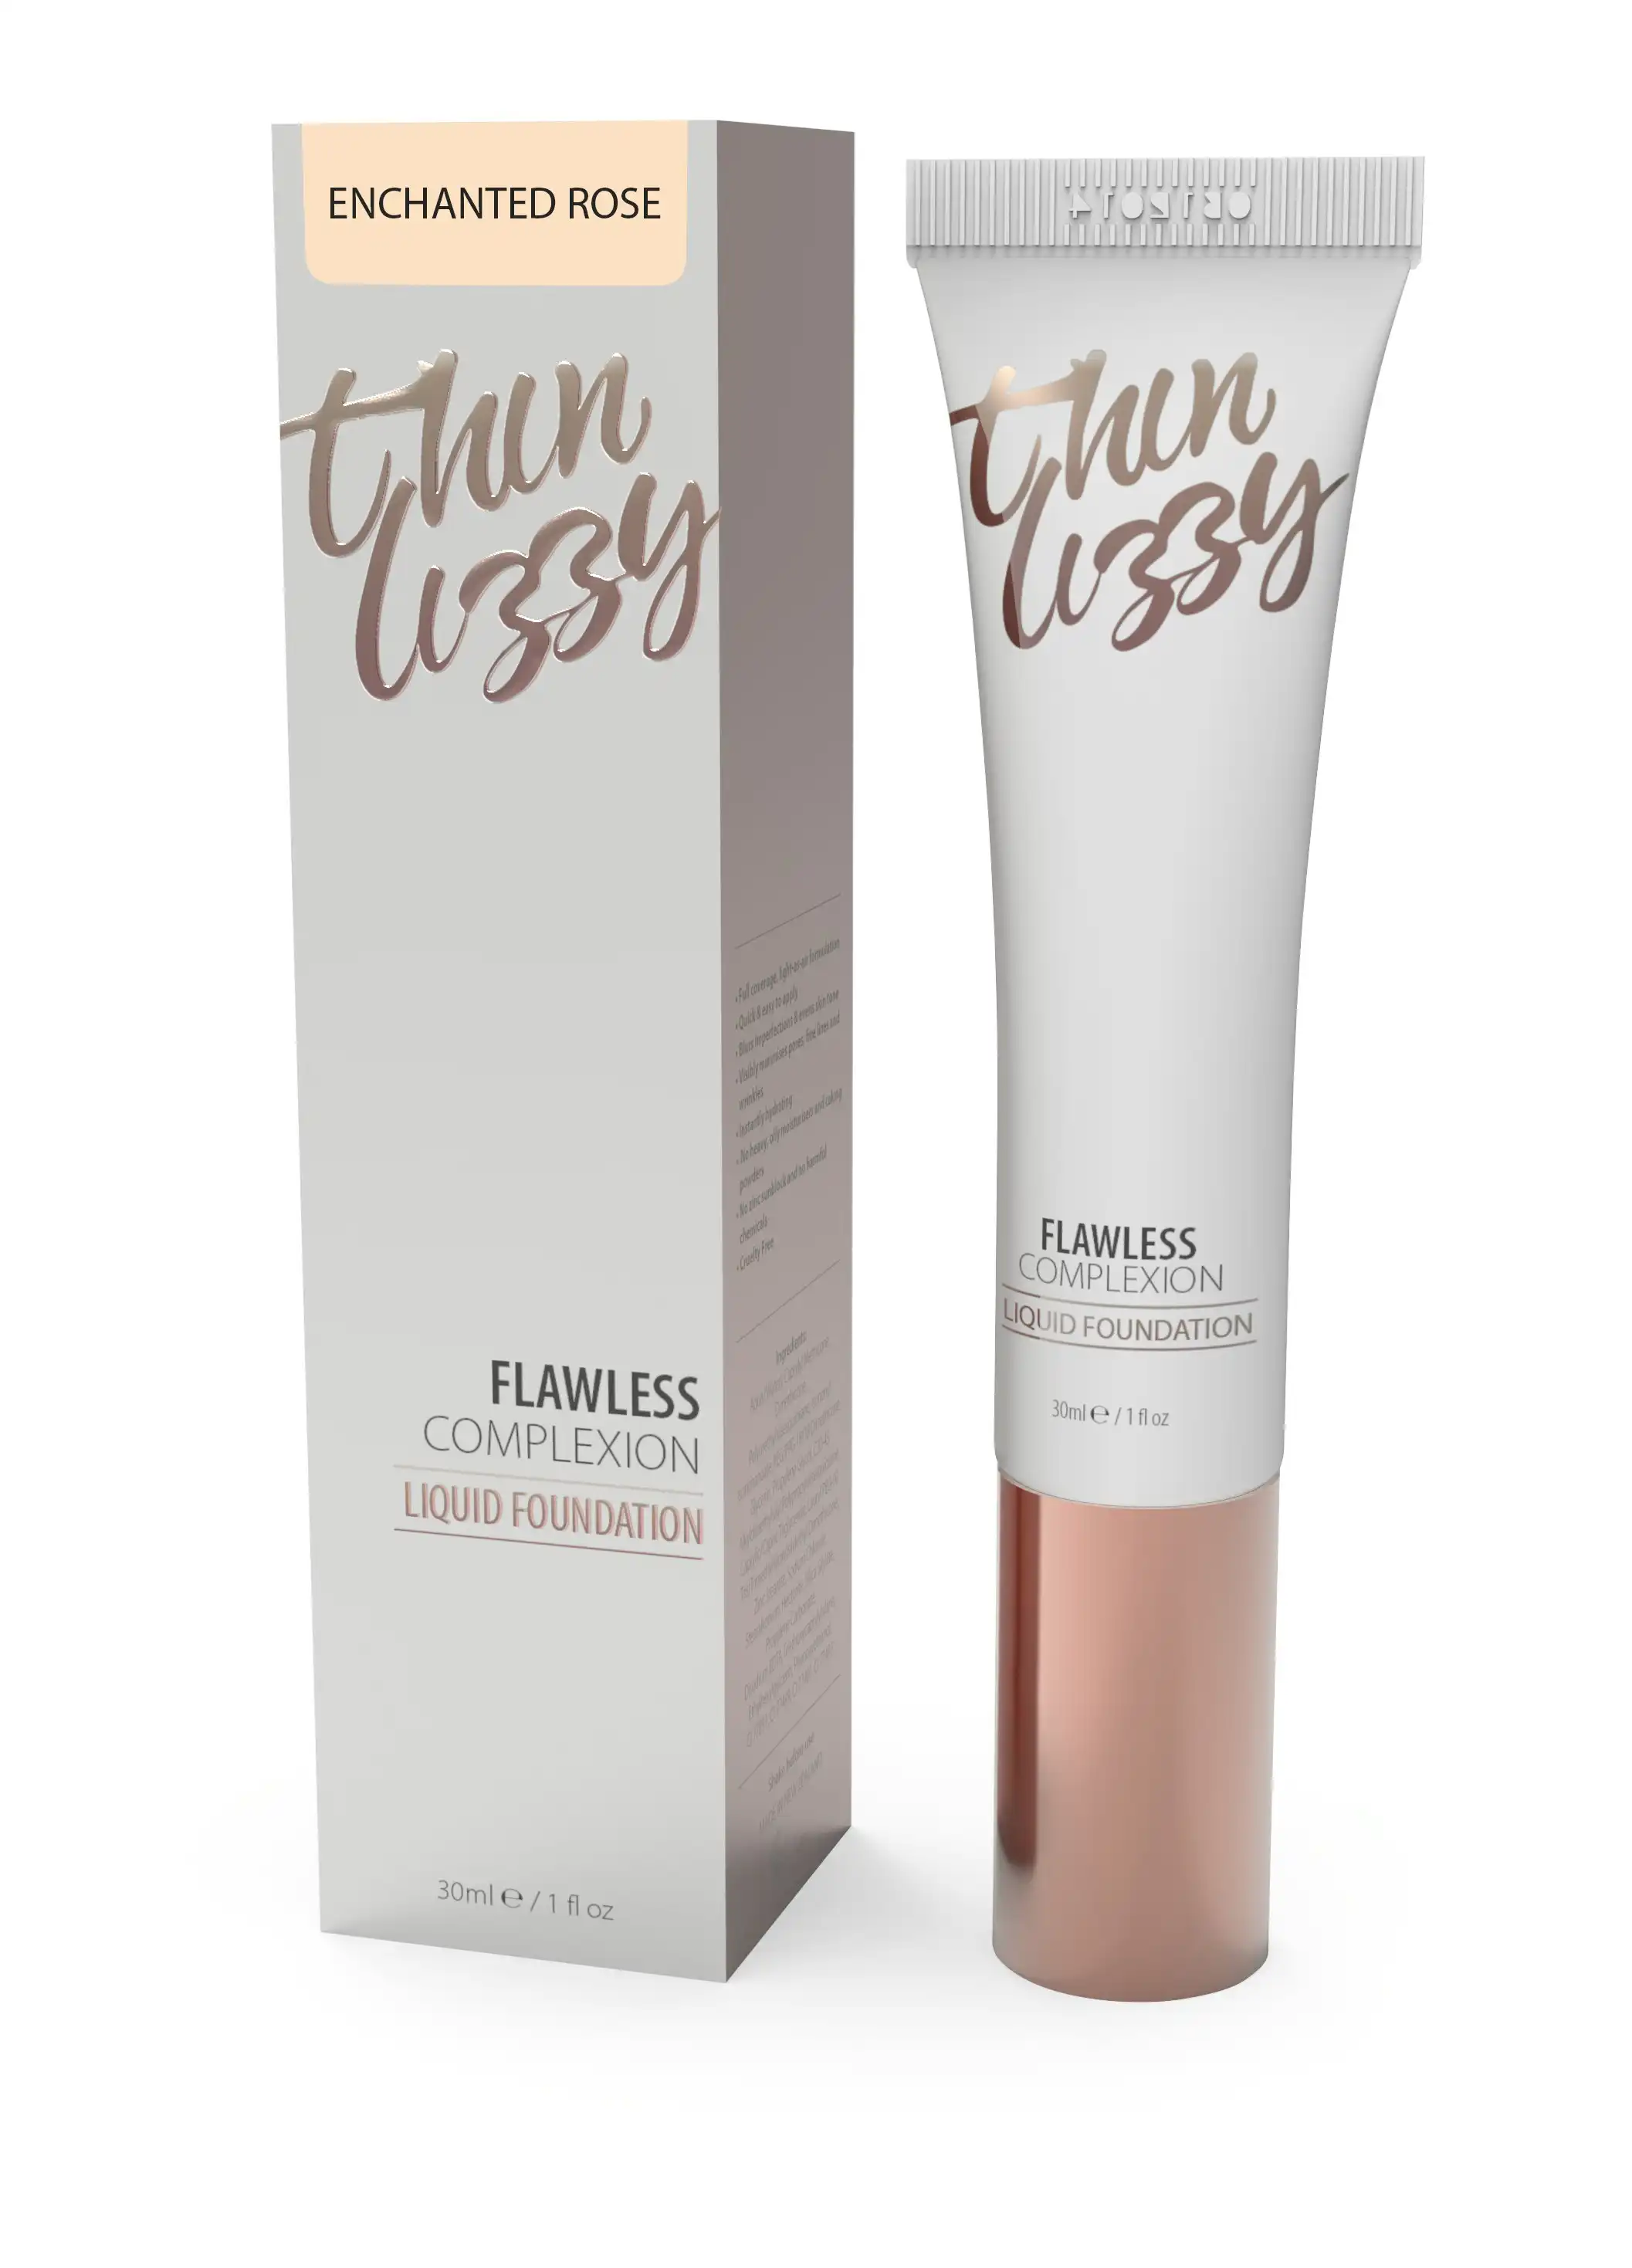 Thin Lizzy Flawless Complexion Liquid Foundation Enchanted Rose